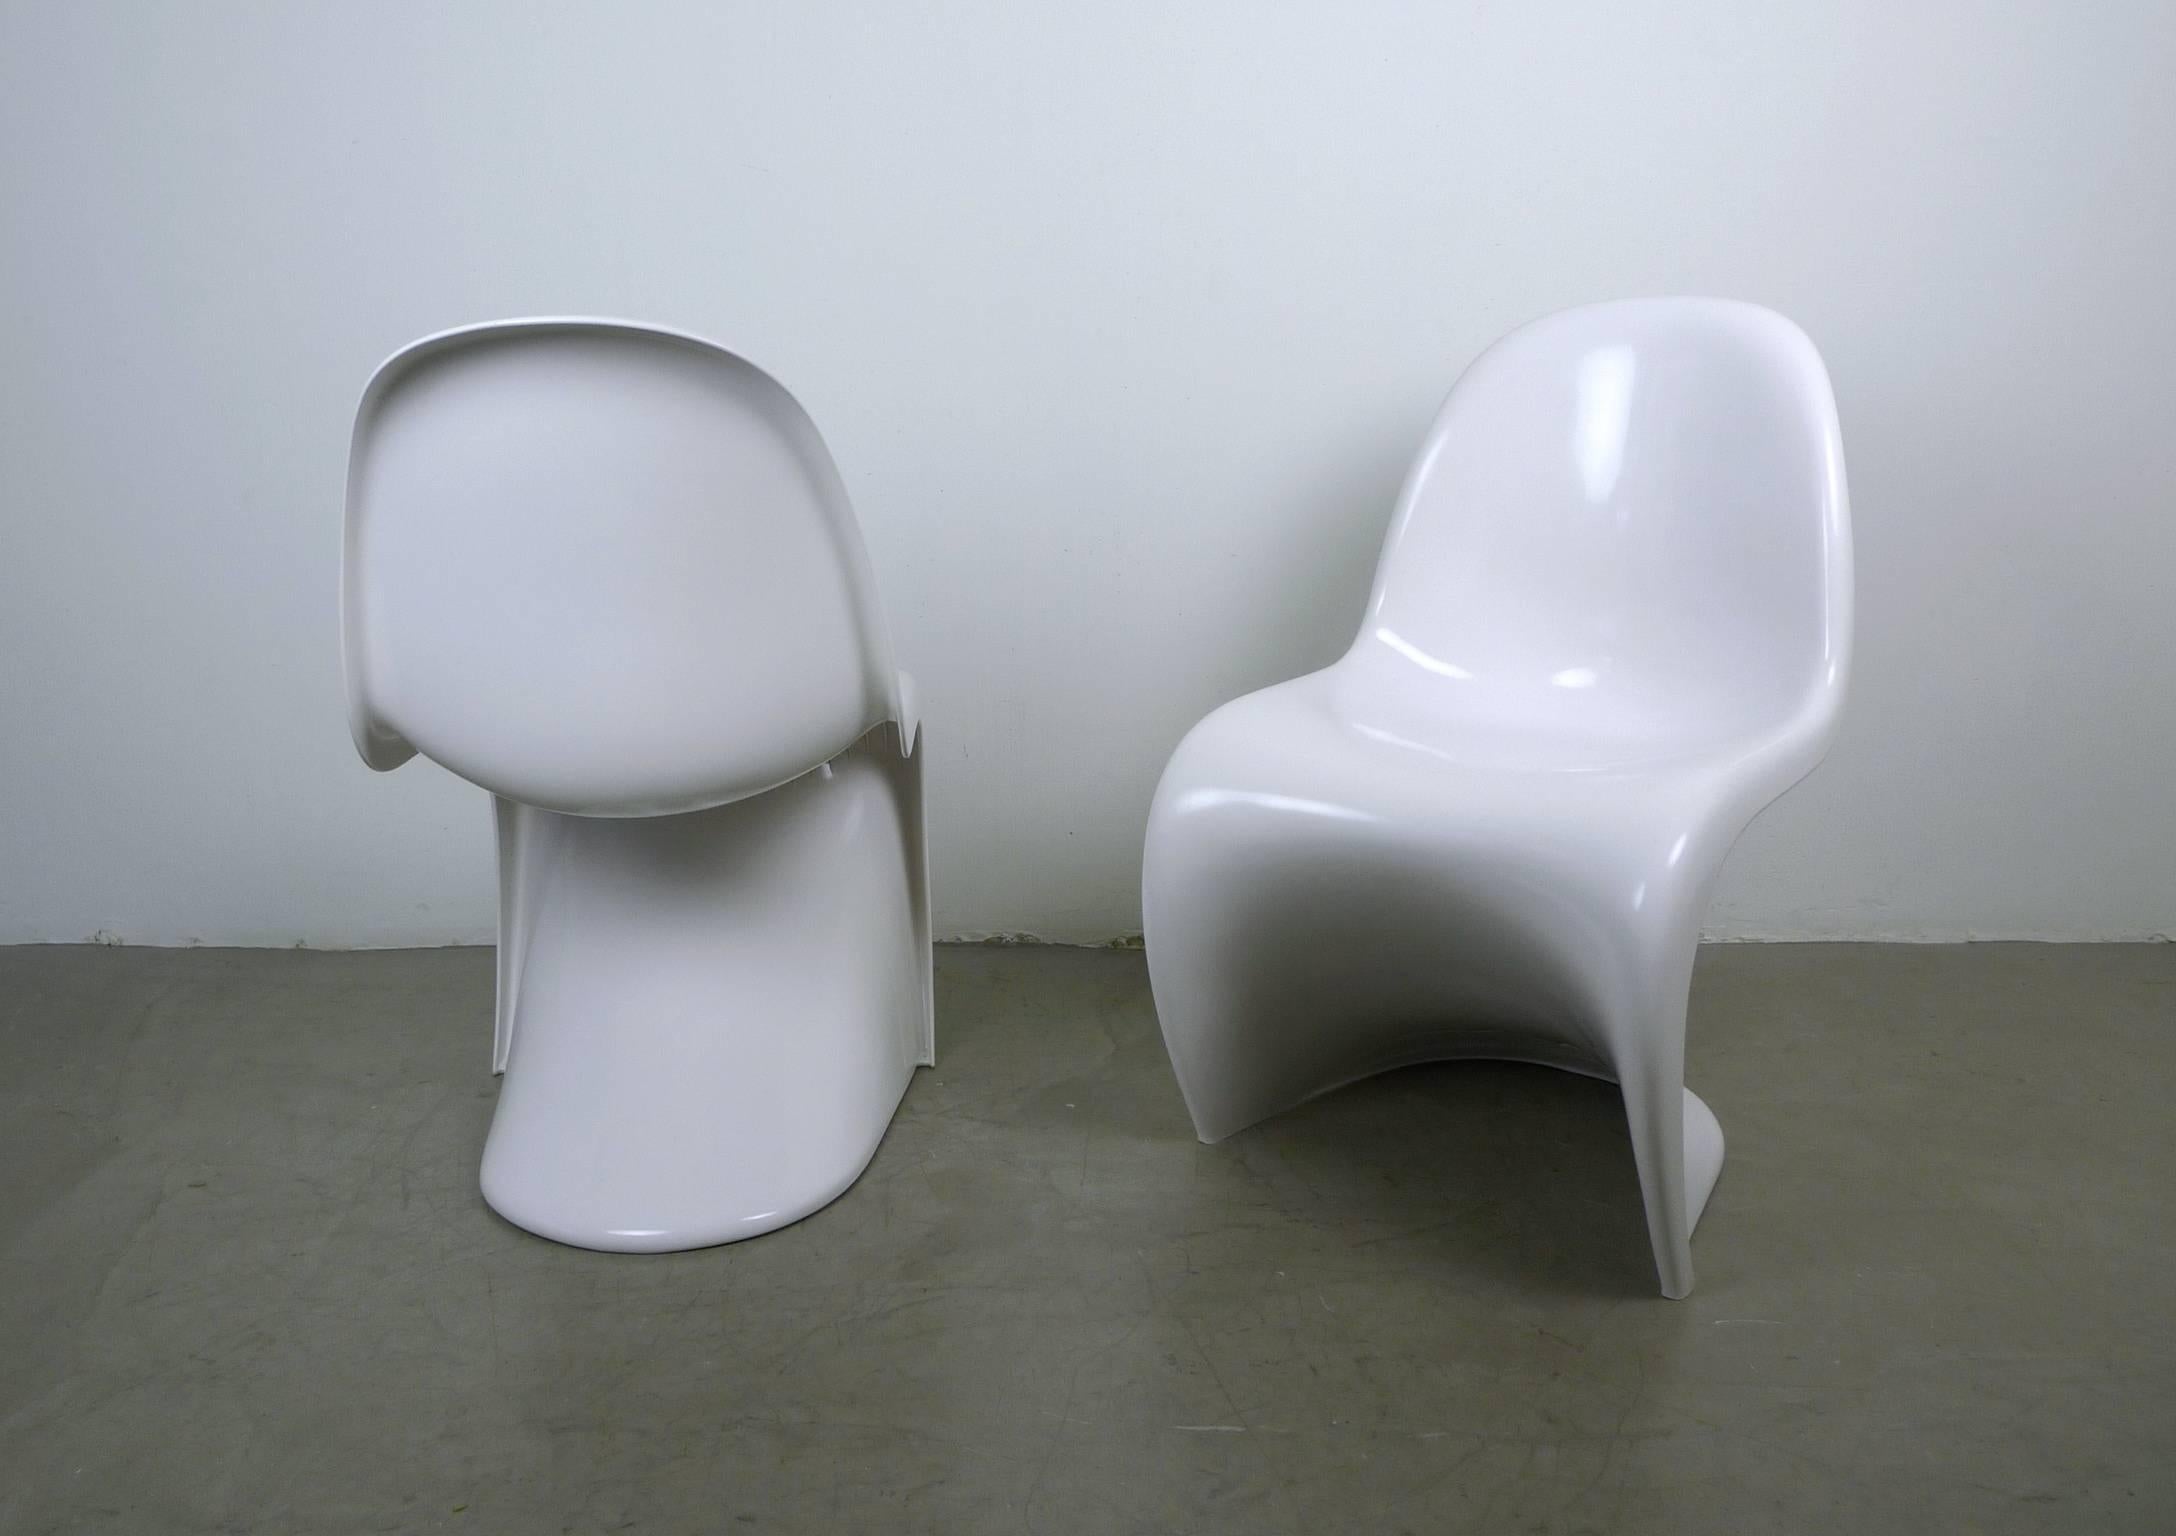 German Pair of White Panton Chairs by Verner Panton for Fehlbau from 1971 and 1972 For Sale